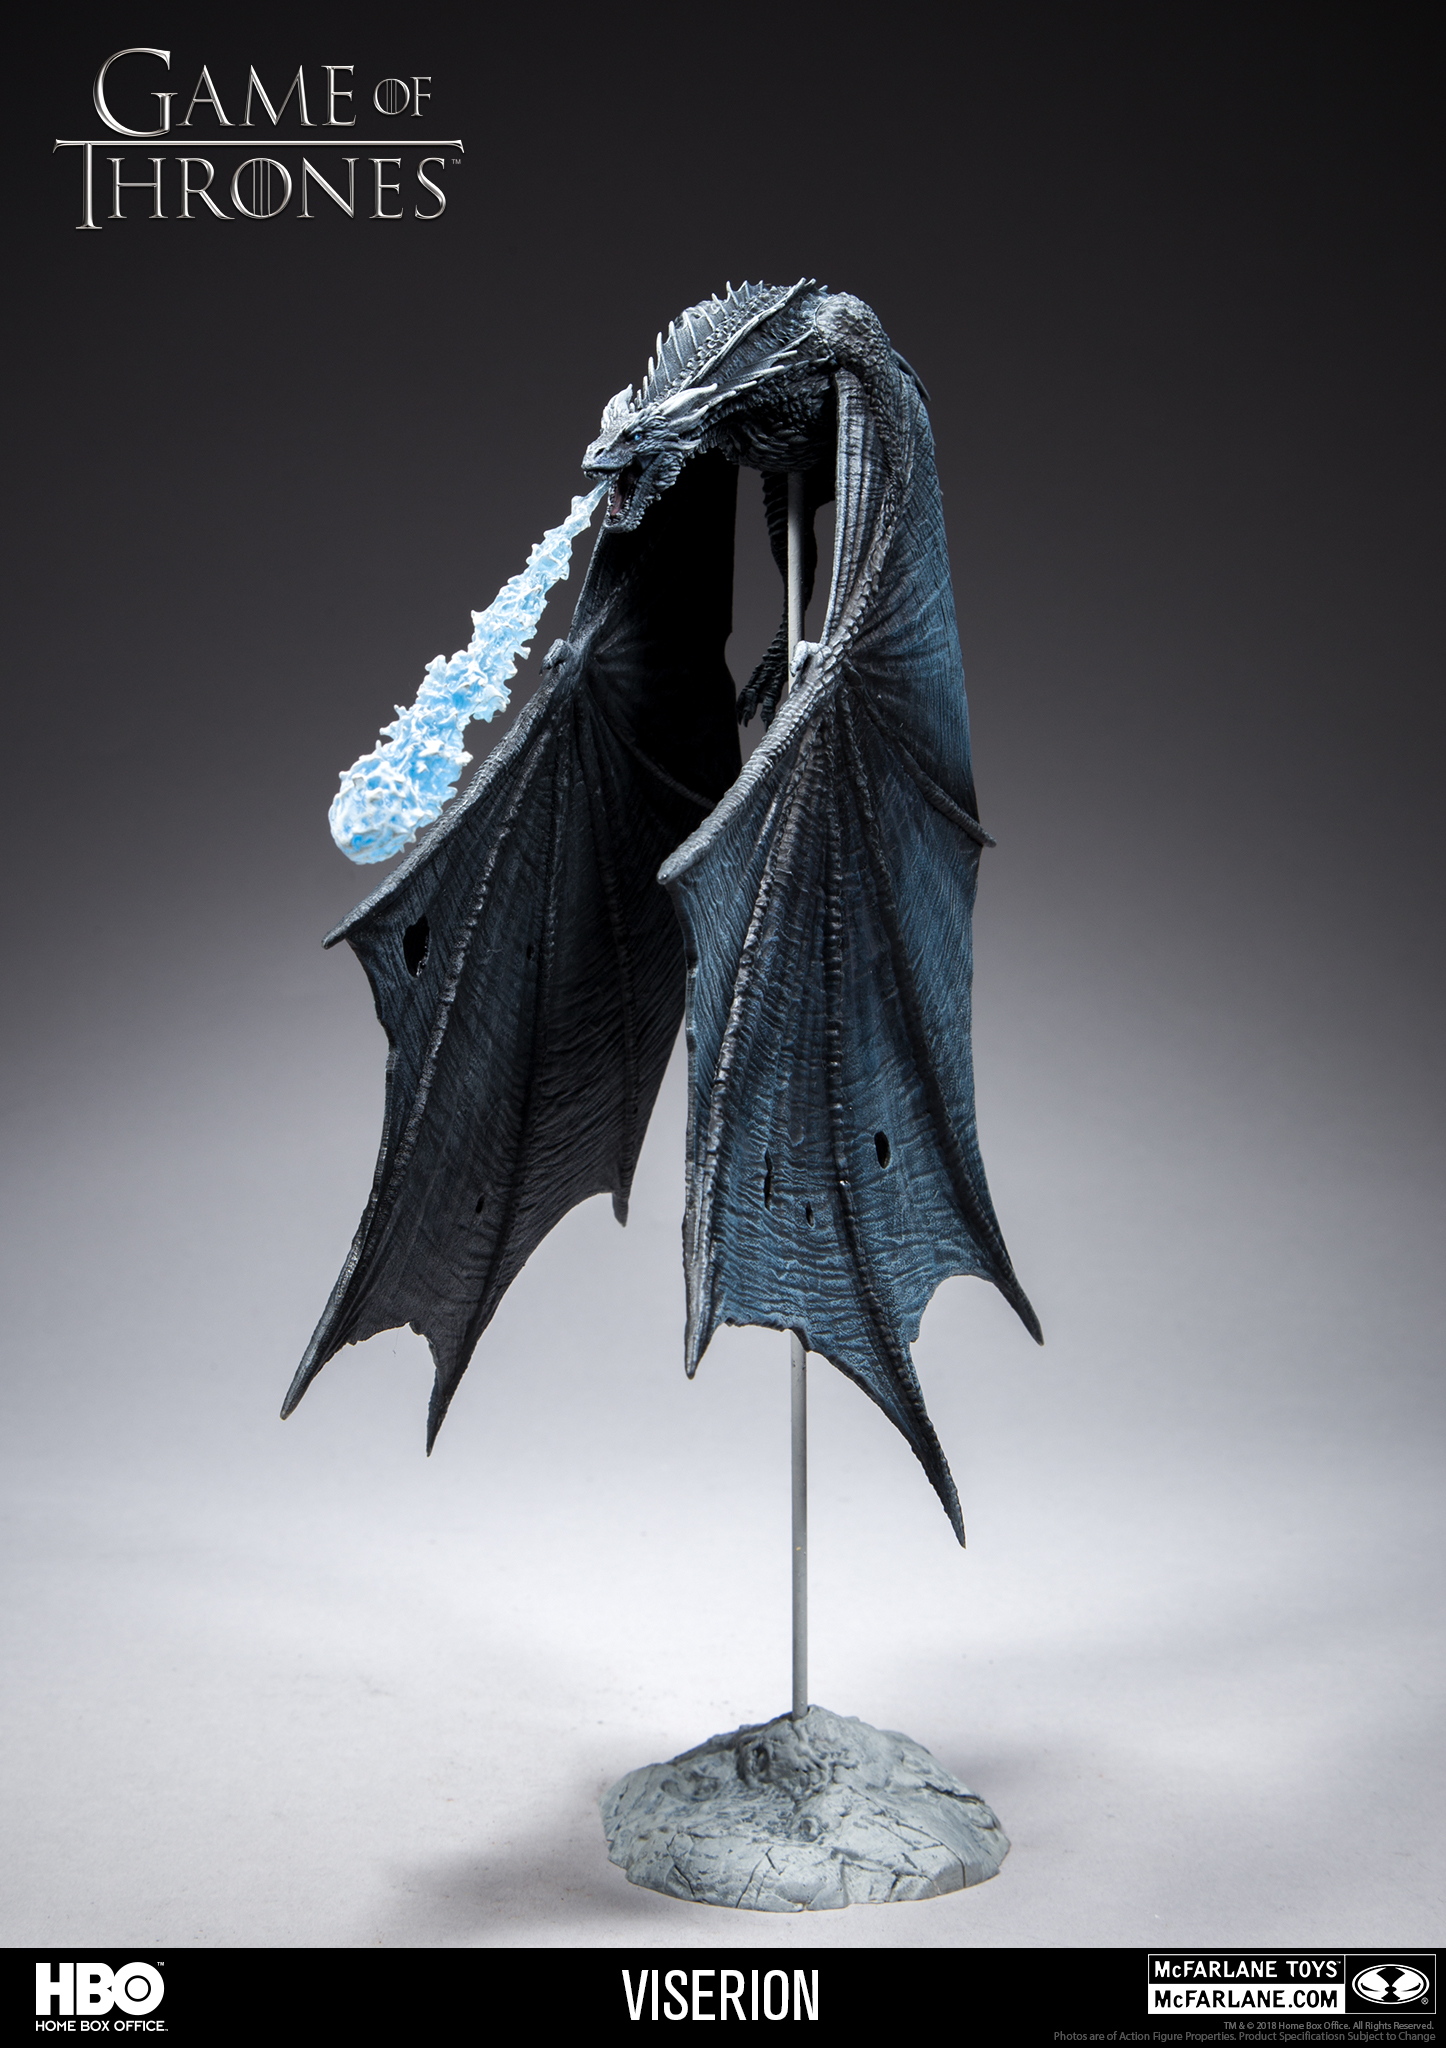 Mf10659 McFarlane Toys Game of Thrones Viserion Version 2 Deluxe Action Figure for sale online